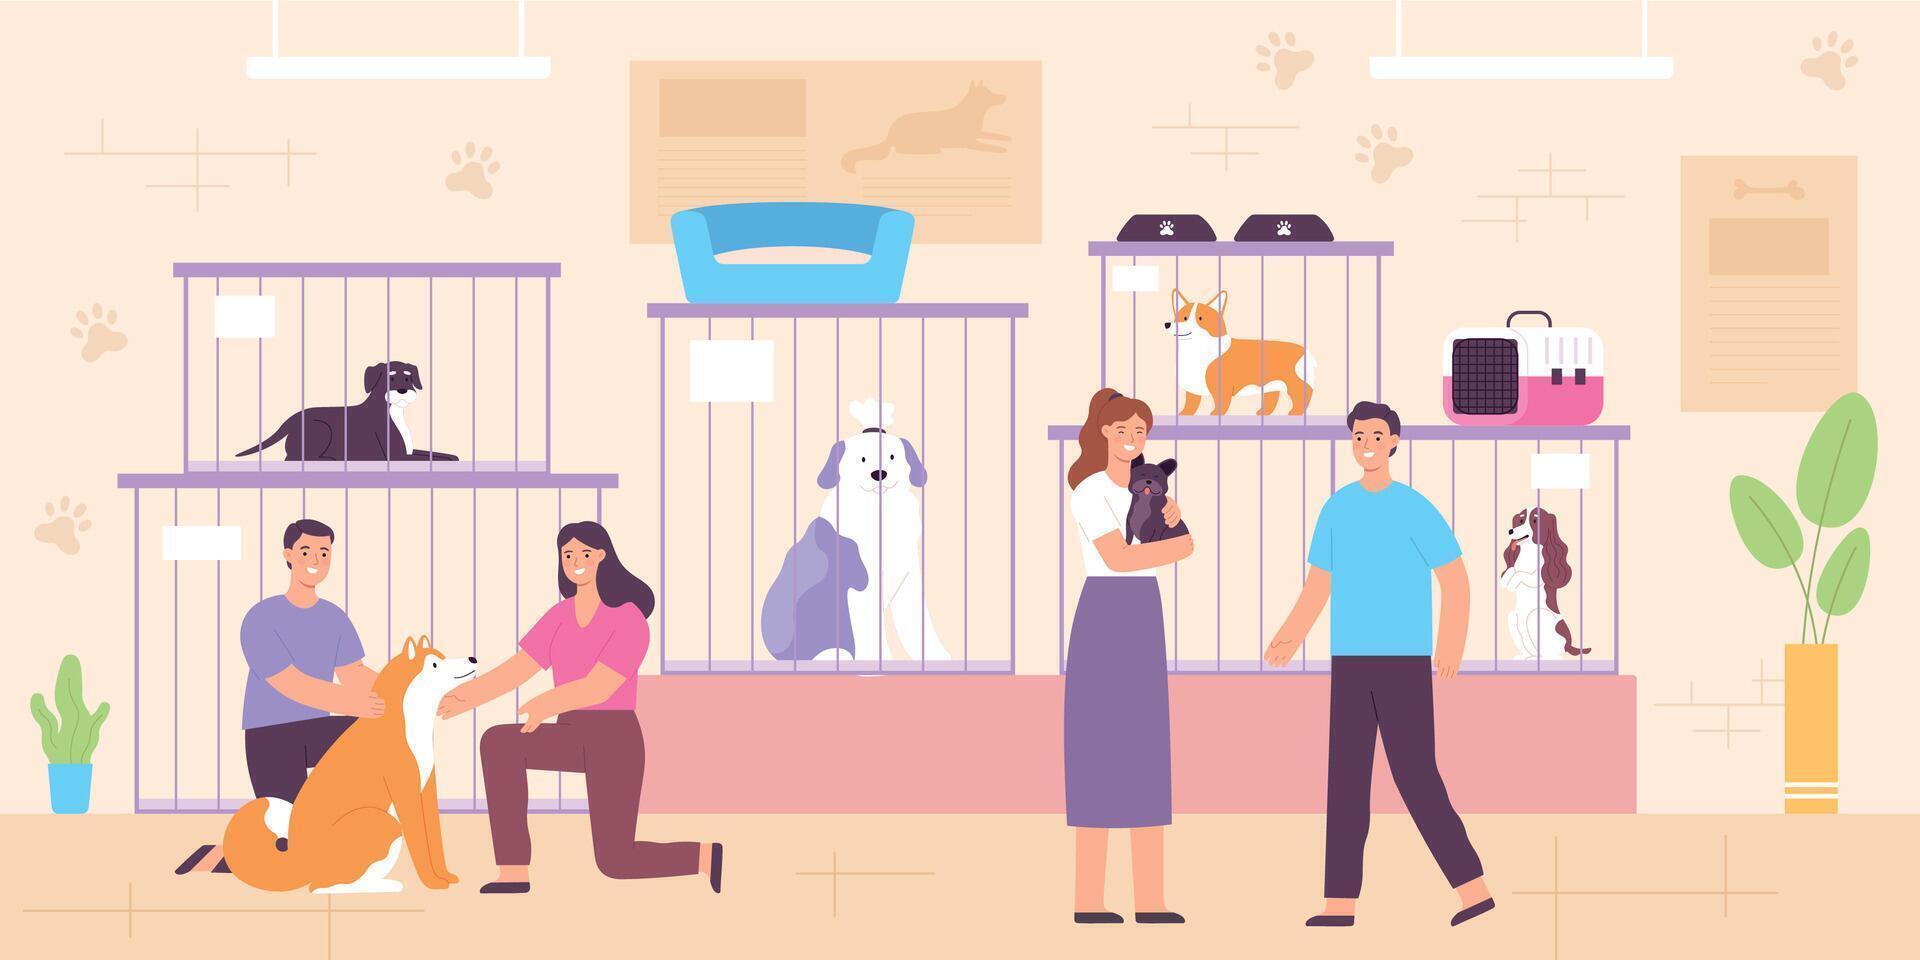 Flat happy people adopting homeless dogs from shelter. Pet shop or adoption center interior with cell cages, dogs and owners vector concept